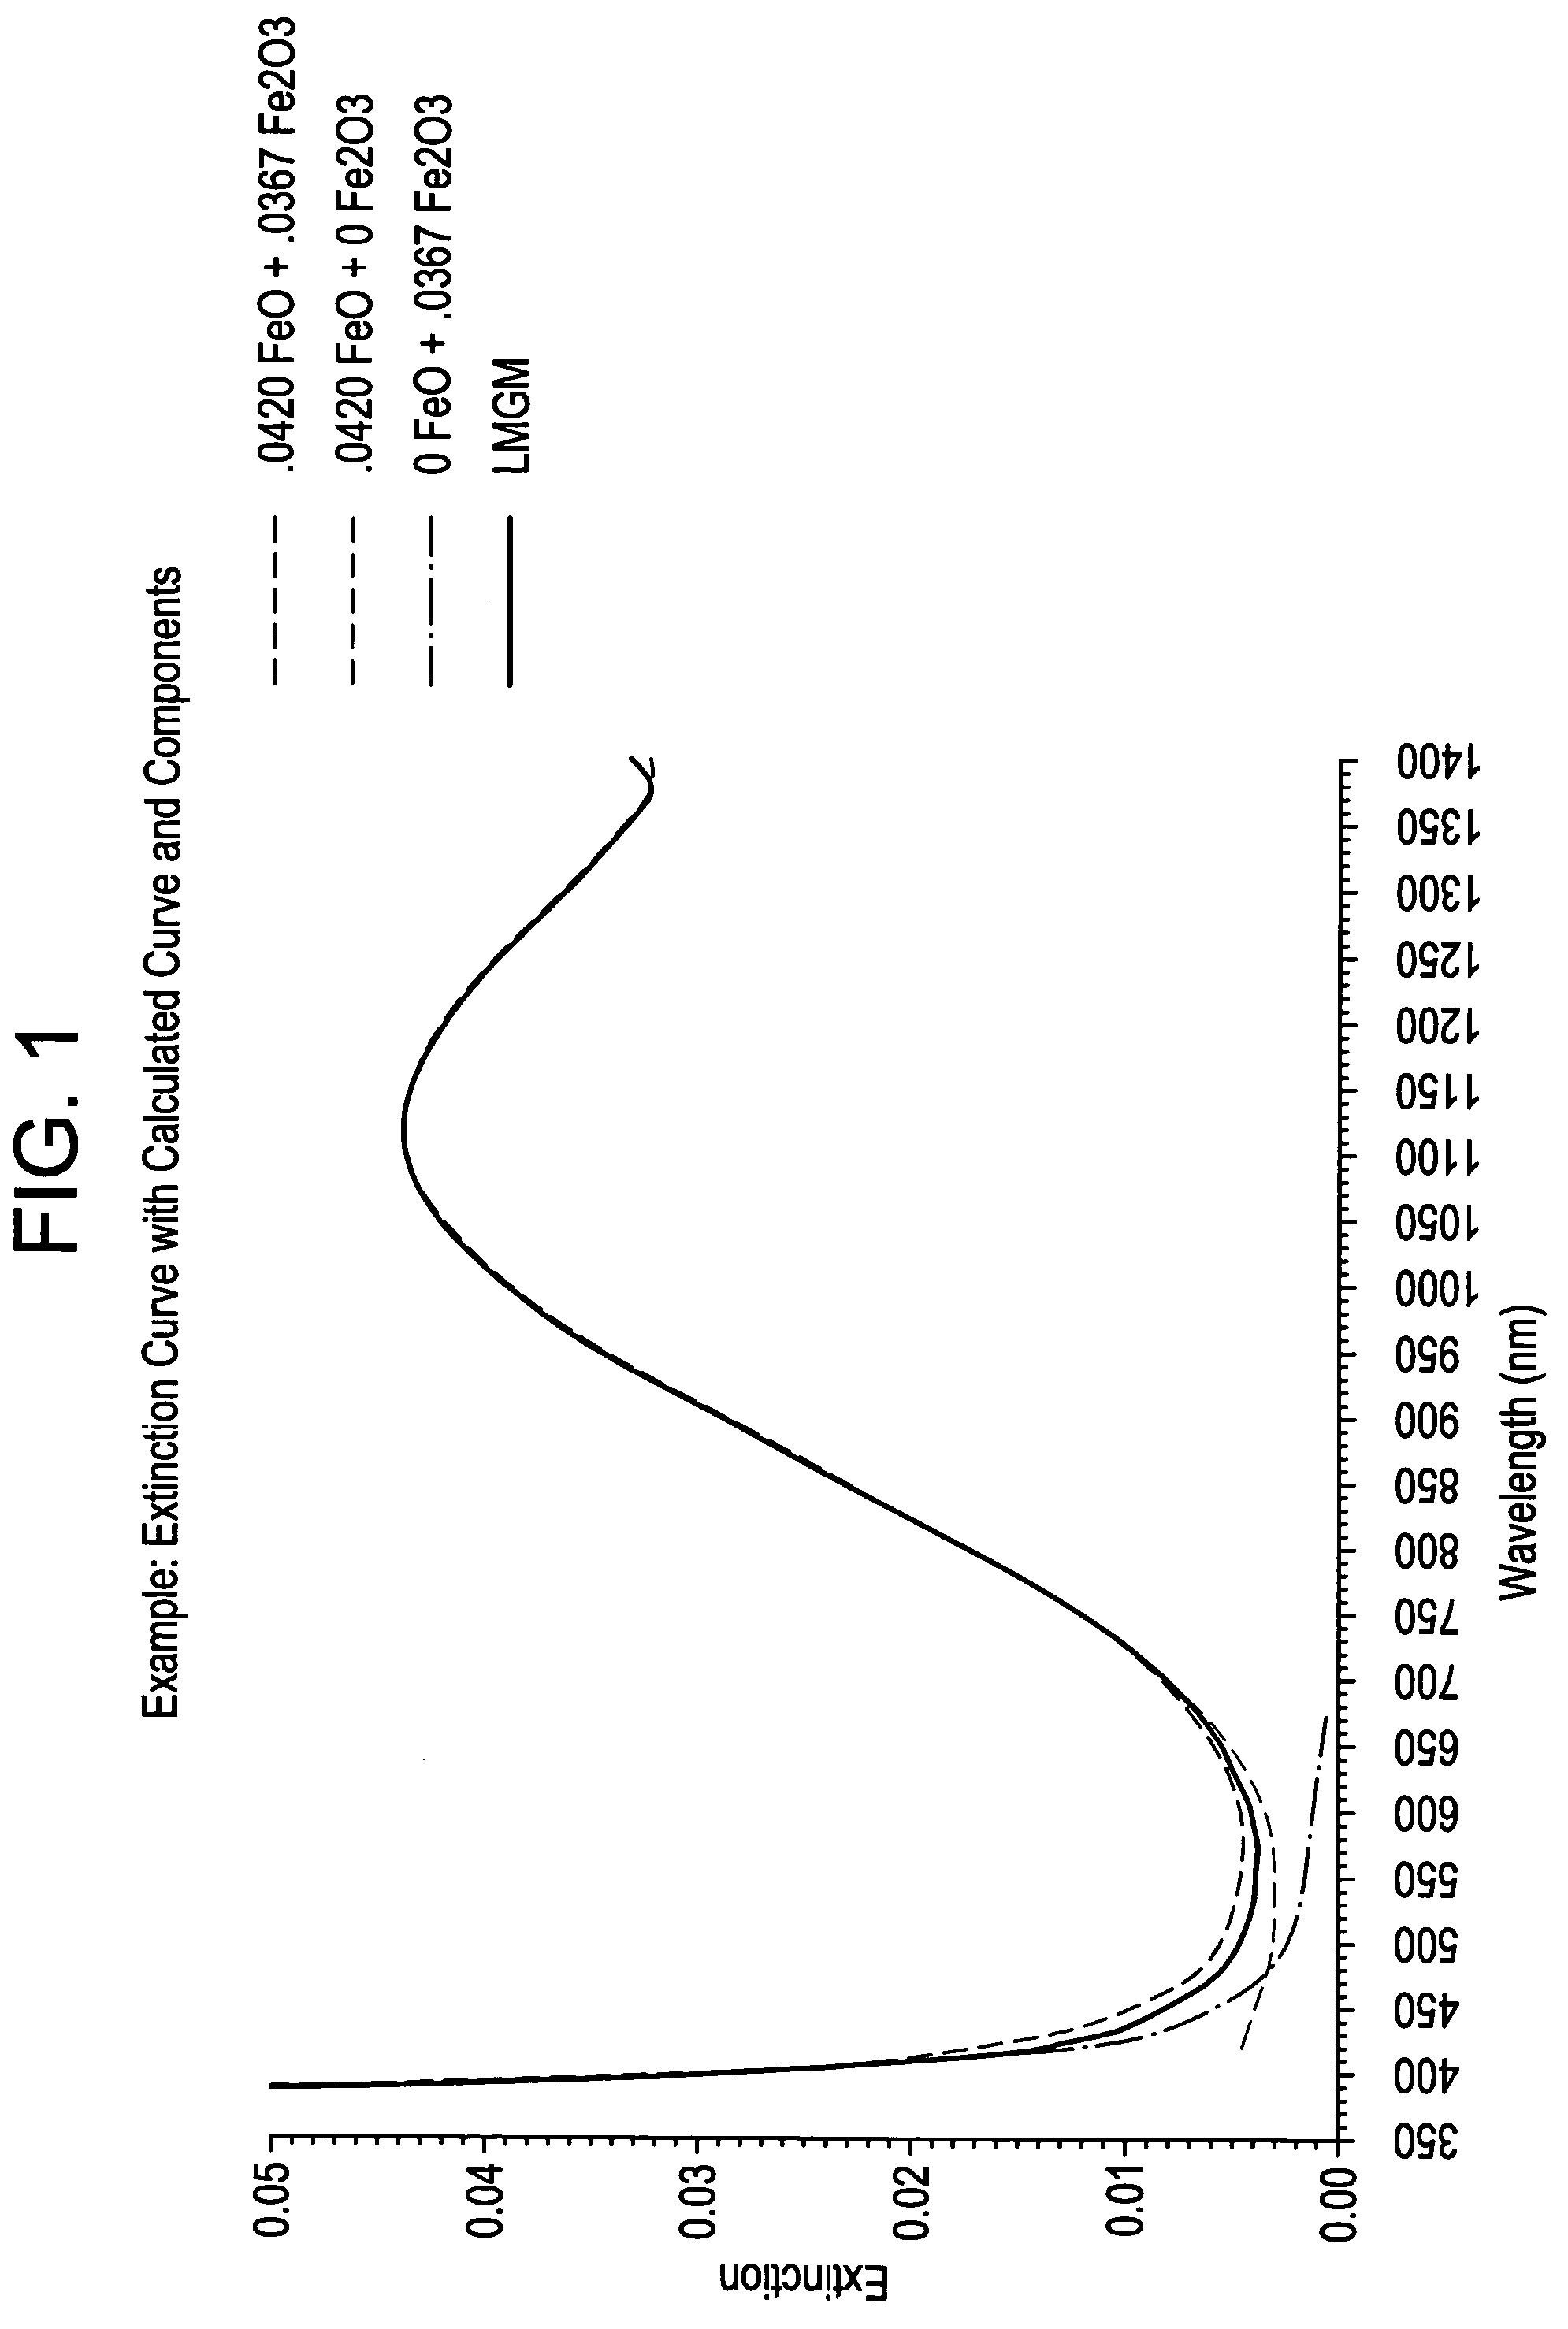 Methods for quantifying the oxidation state of glass